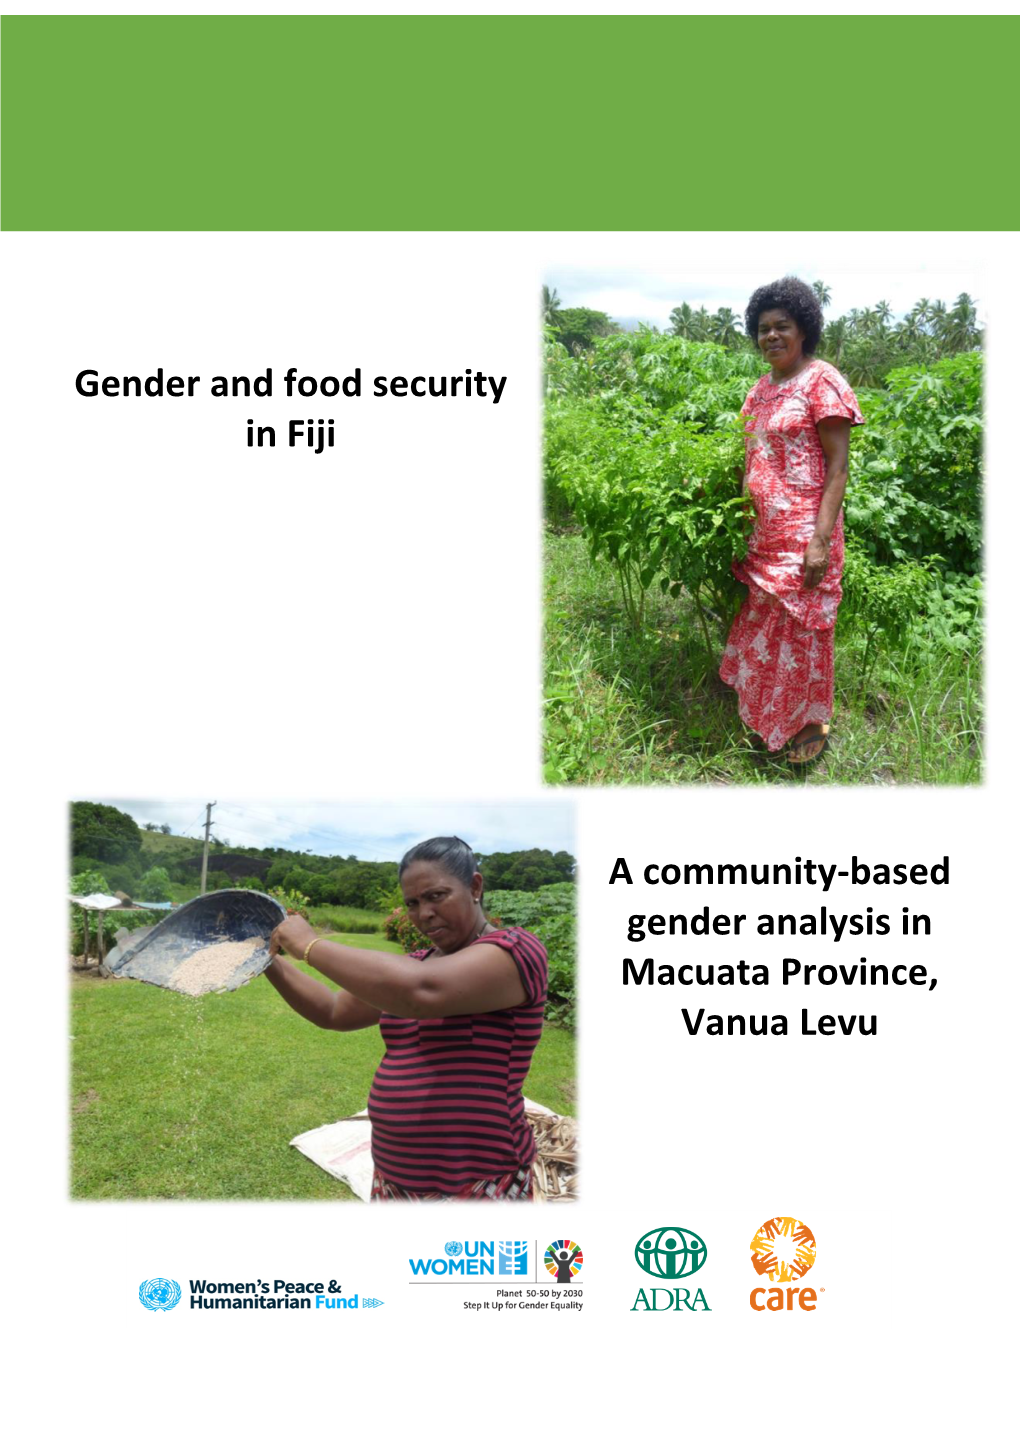 Gender and Food Security in Fiji a Community-Based